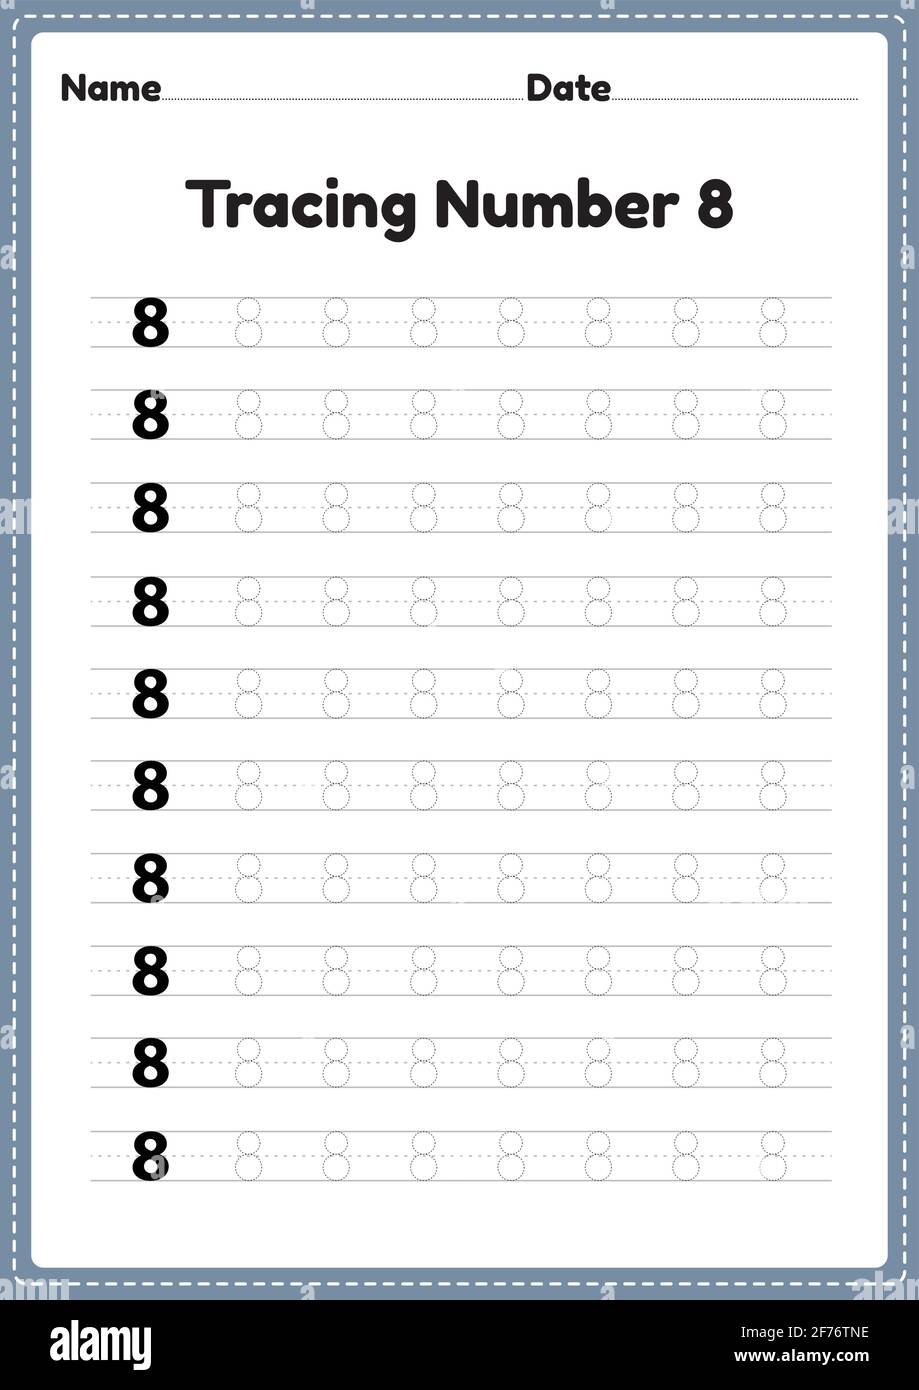 Tracing number 8 worksheet for kindergarten and preschool kids for educational handwriting practice in a printable page. Stock Vector